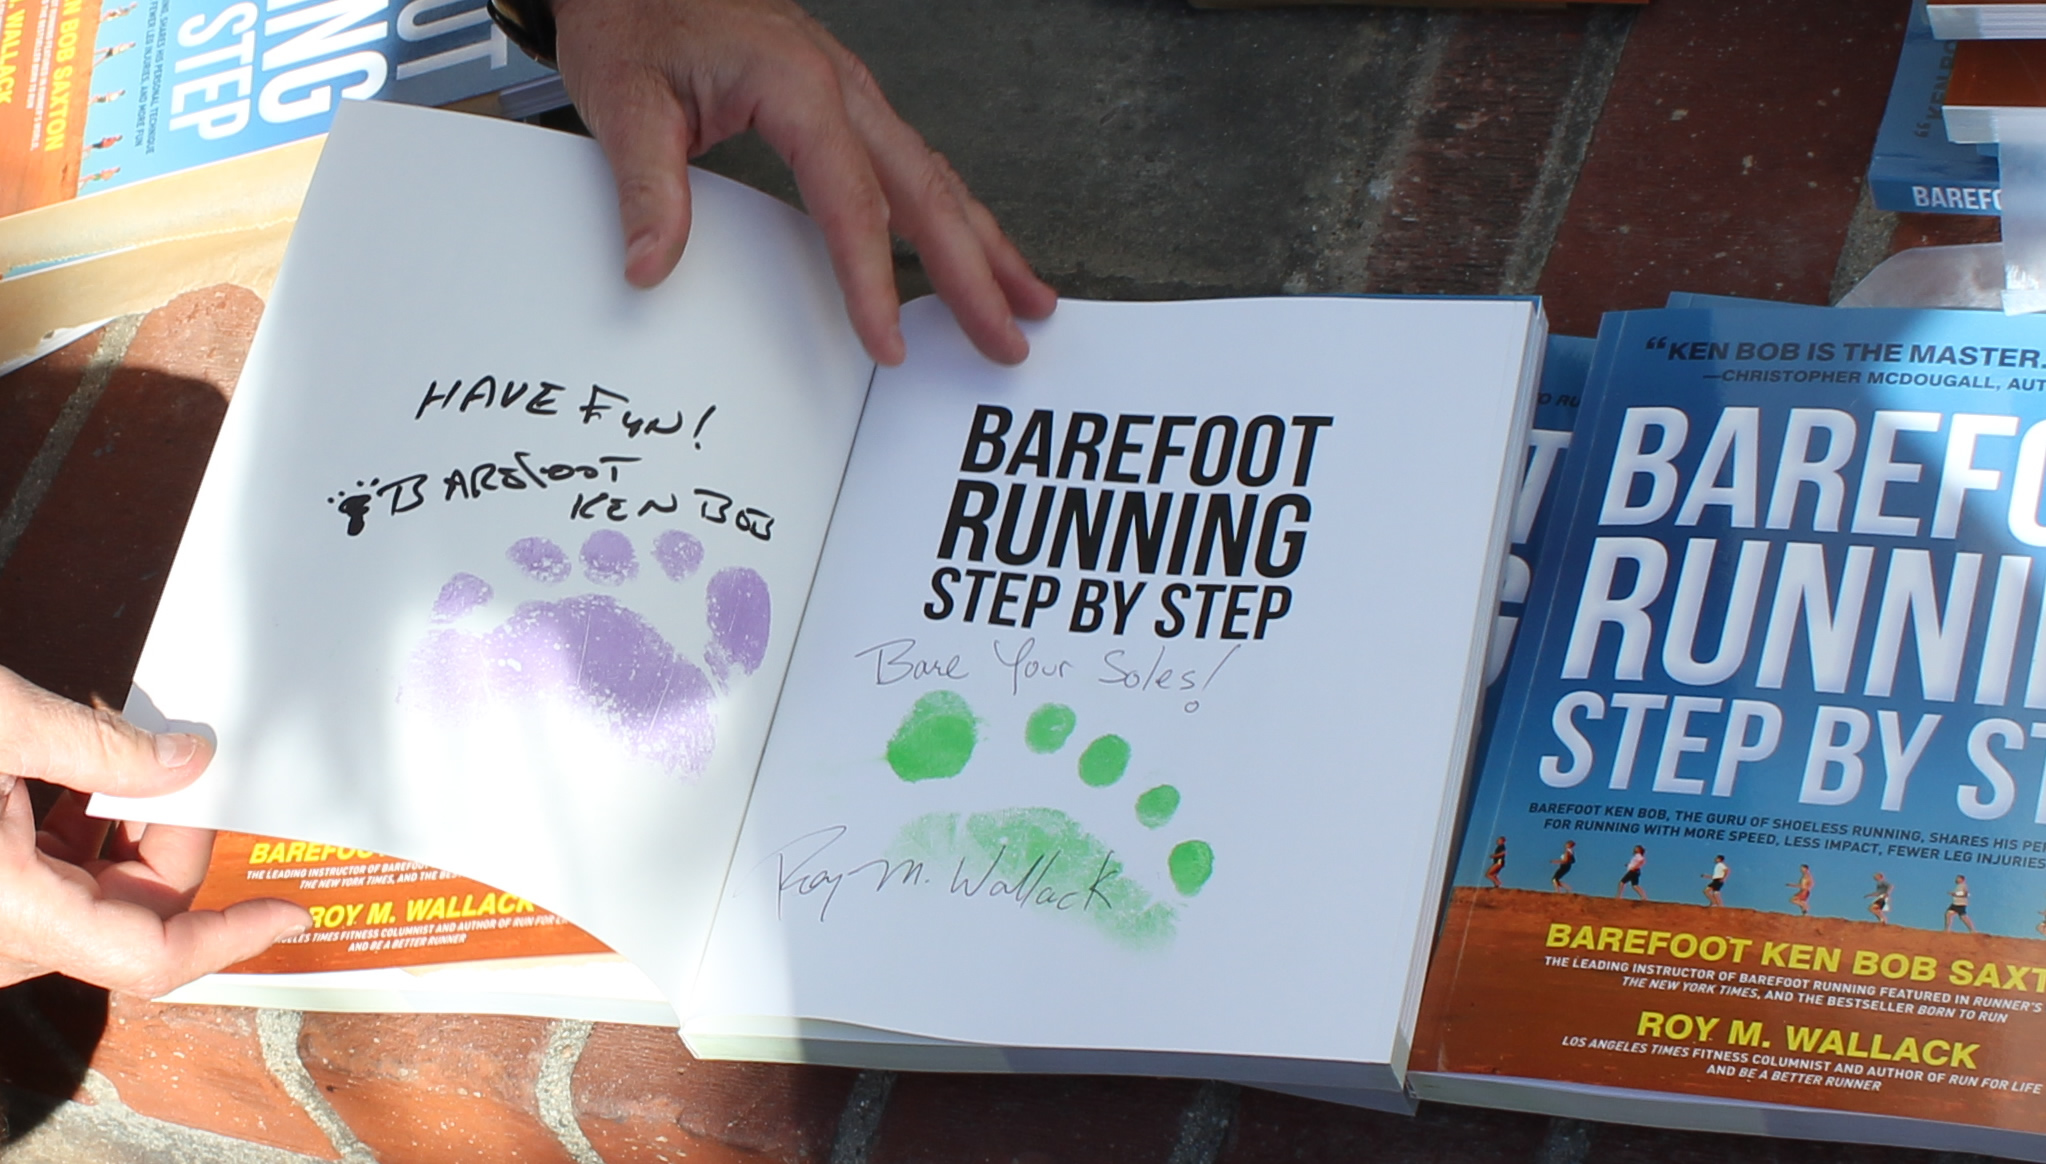 Barefoot Running Step by Step - auto-foot-print-graphed by Roy and Ken Bob